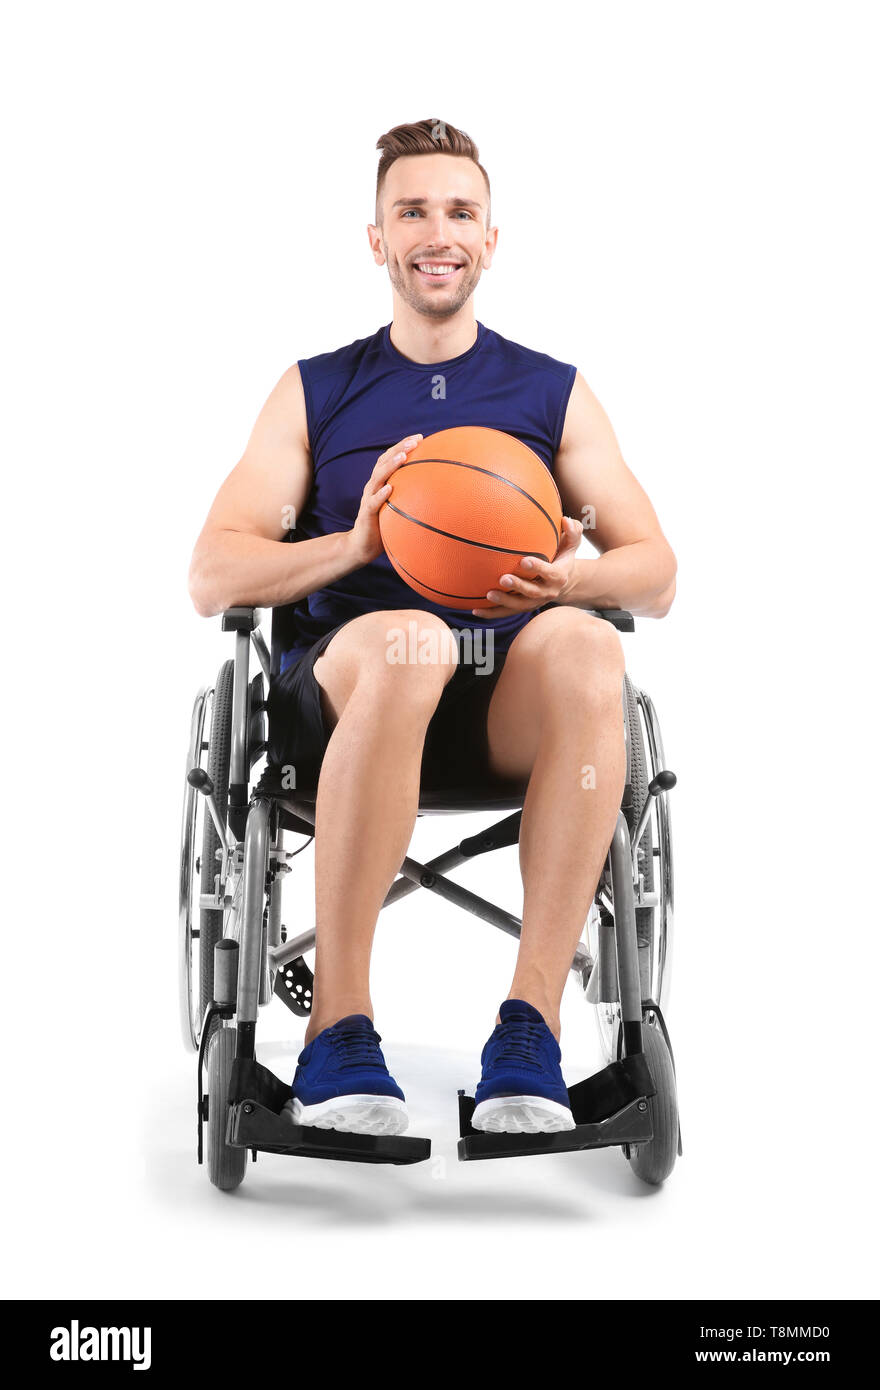 Young basketball player sitting in wheelchair on white background Stock Photo